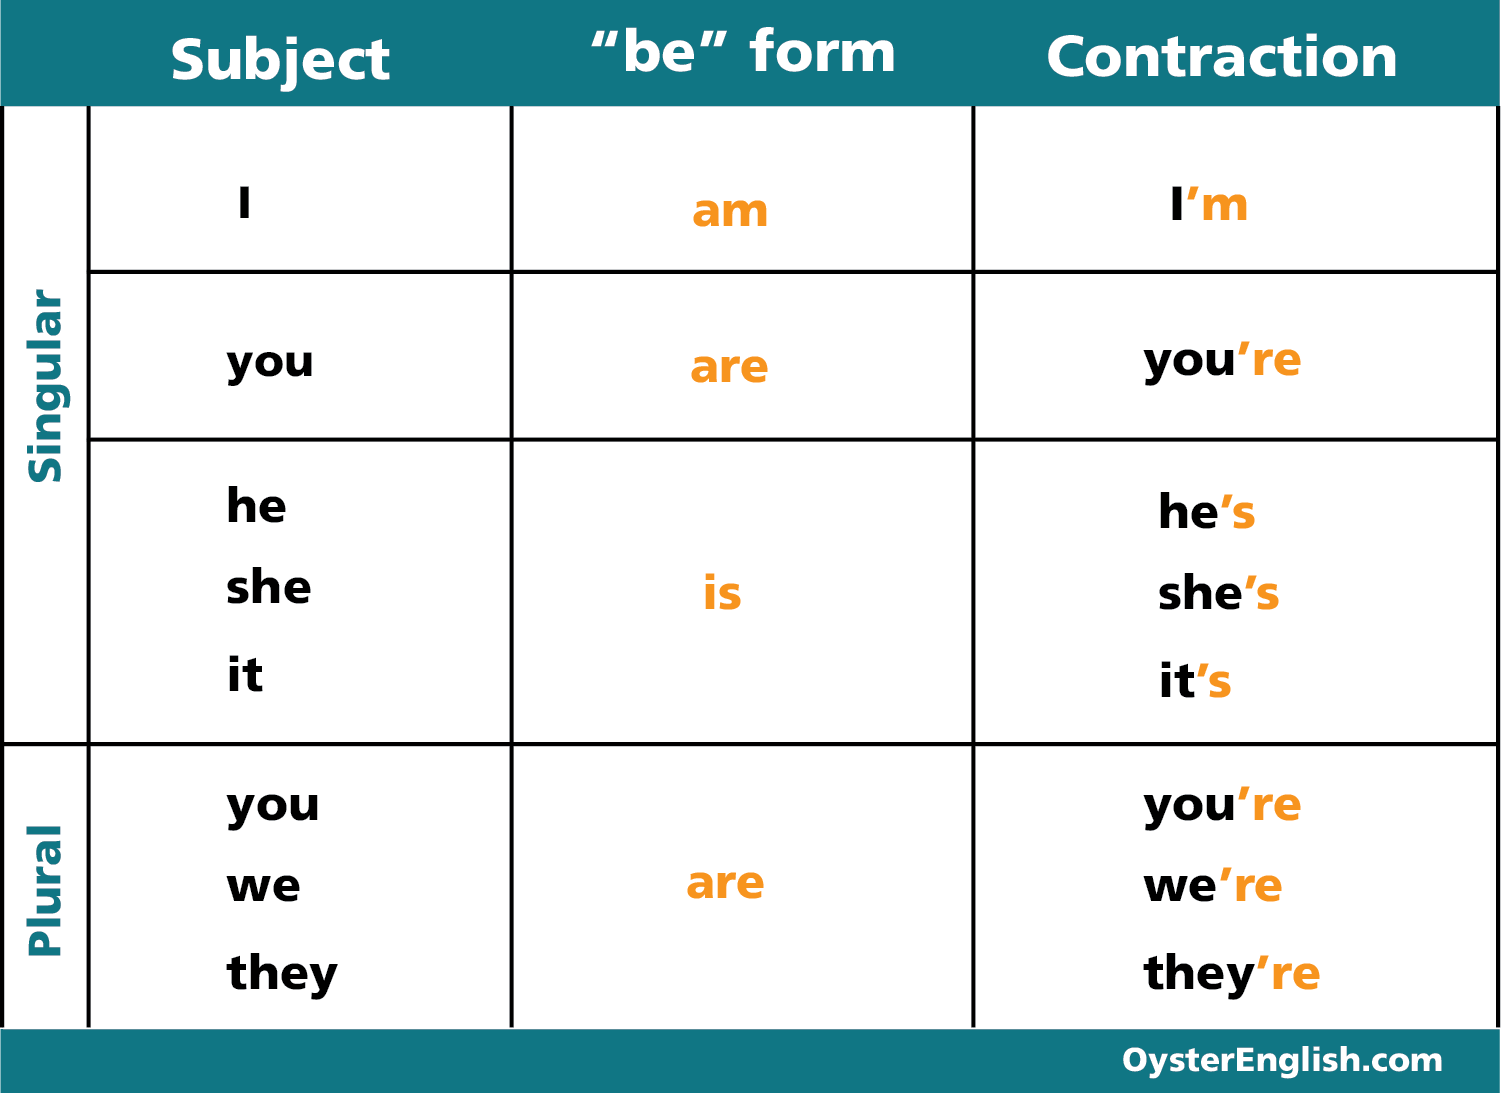 present-simple-tense-grammar-rules-and-examples-7-e-s-l